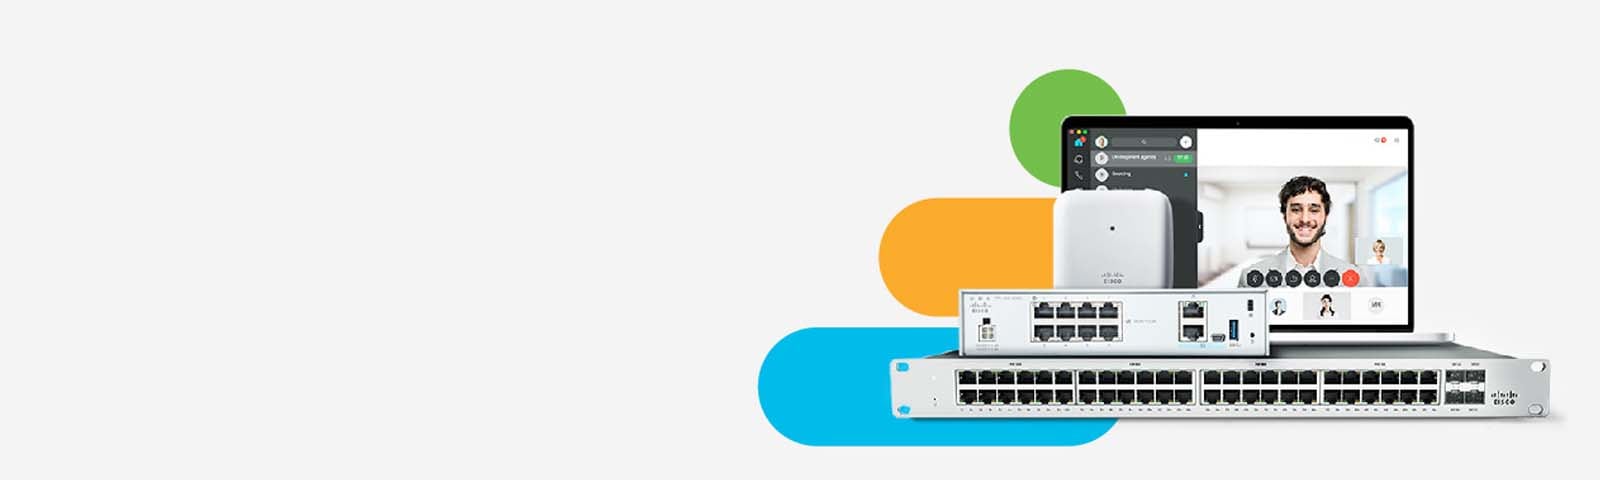 Buy Cisco Small Business Products Online